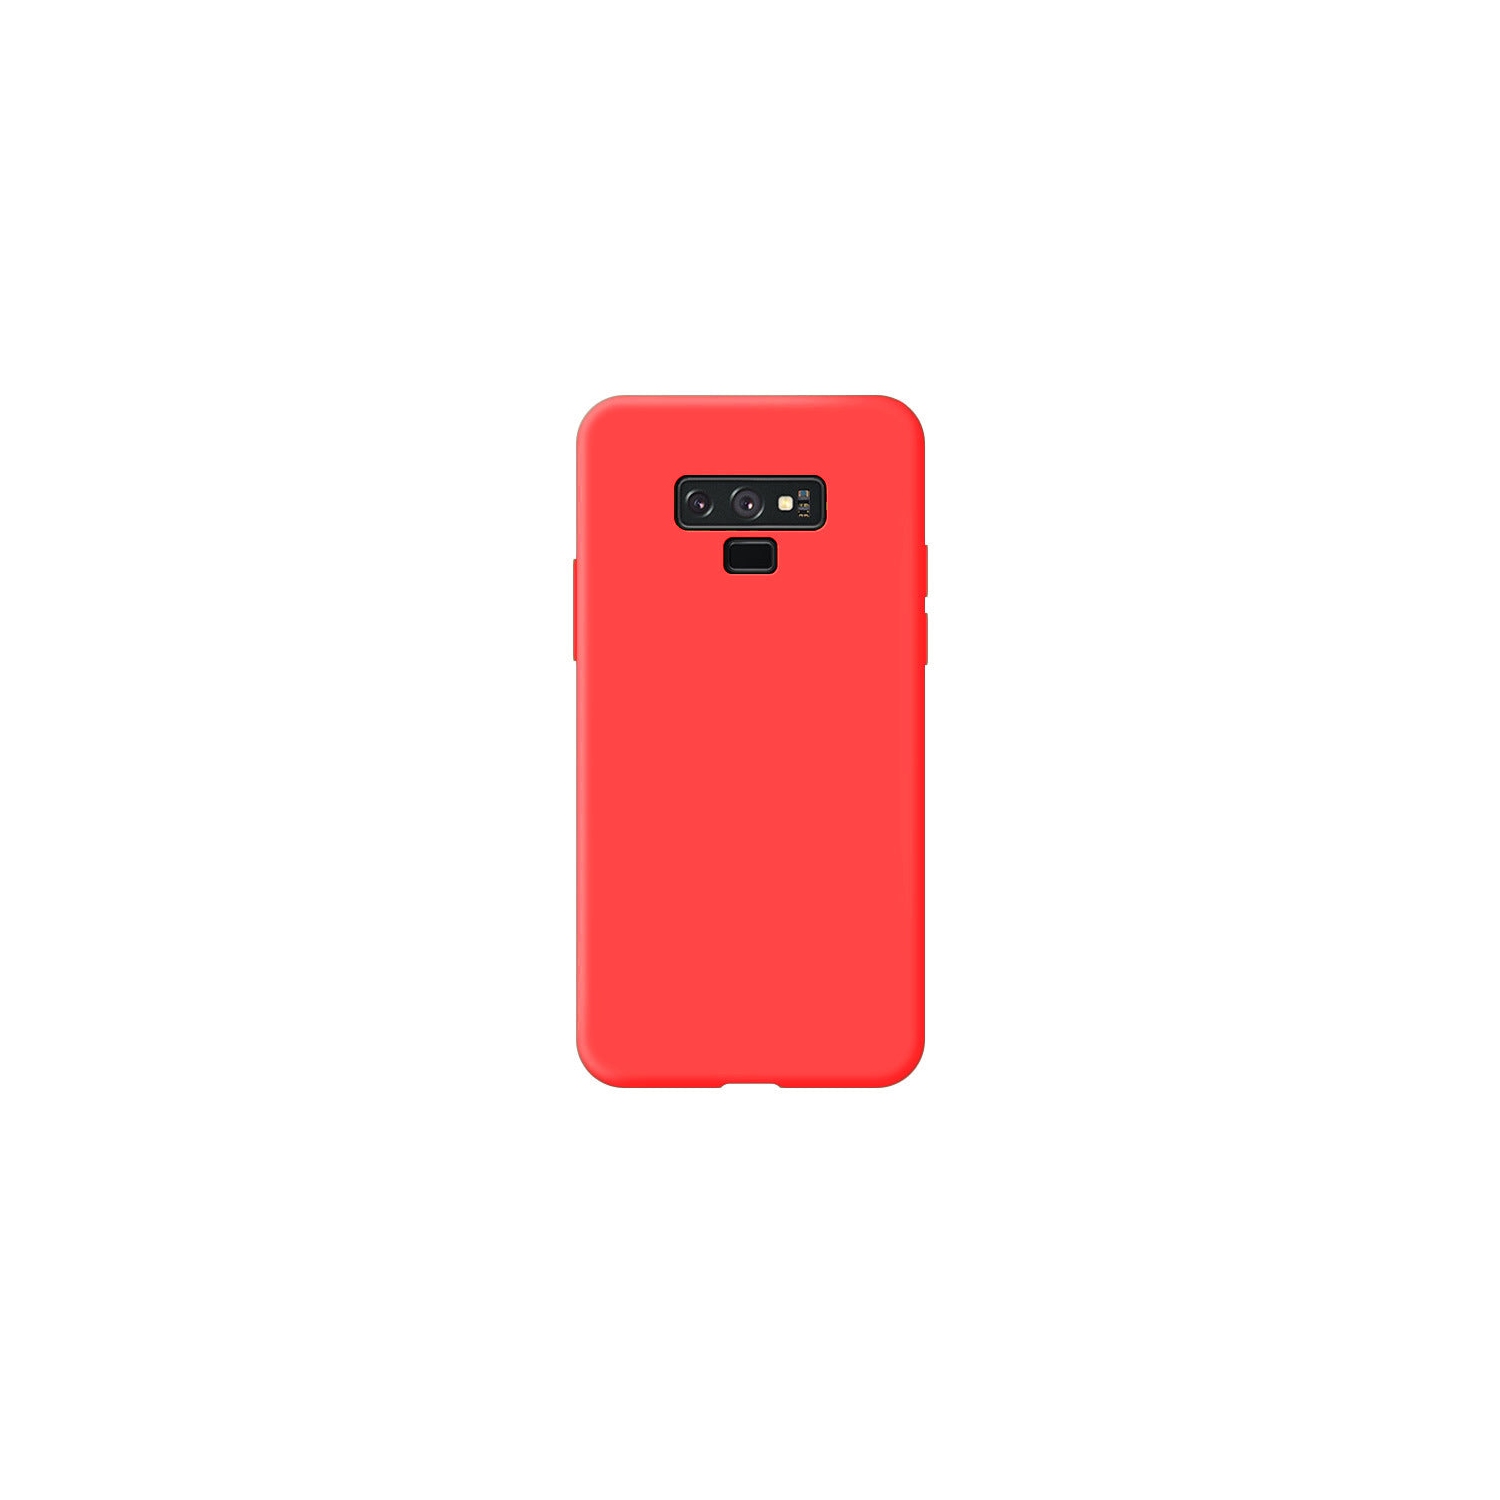 PANDACO Soft Shell Matte Red Case for Samsung Galaxy Note 9